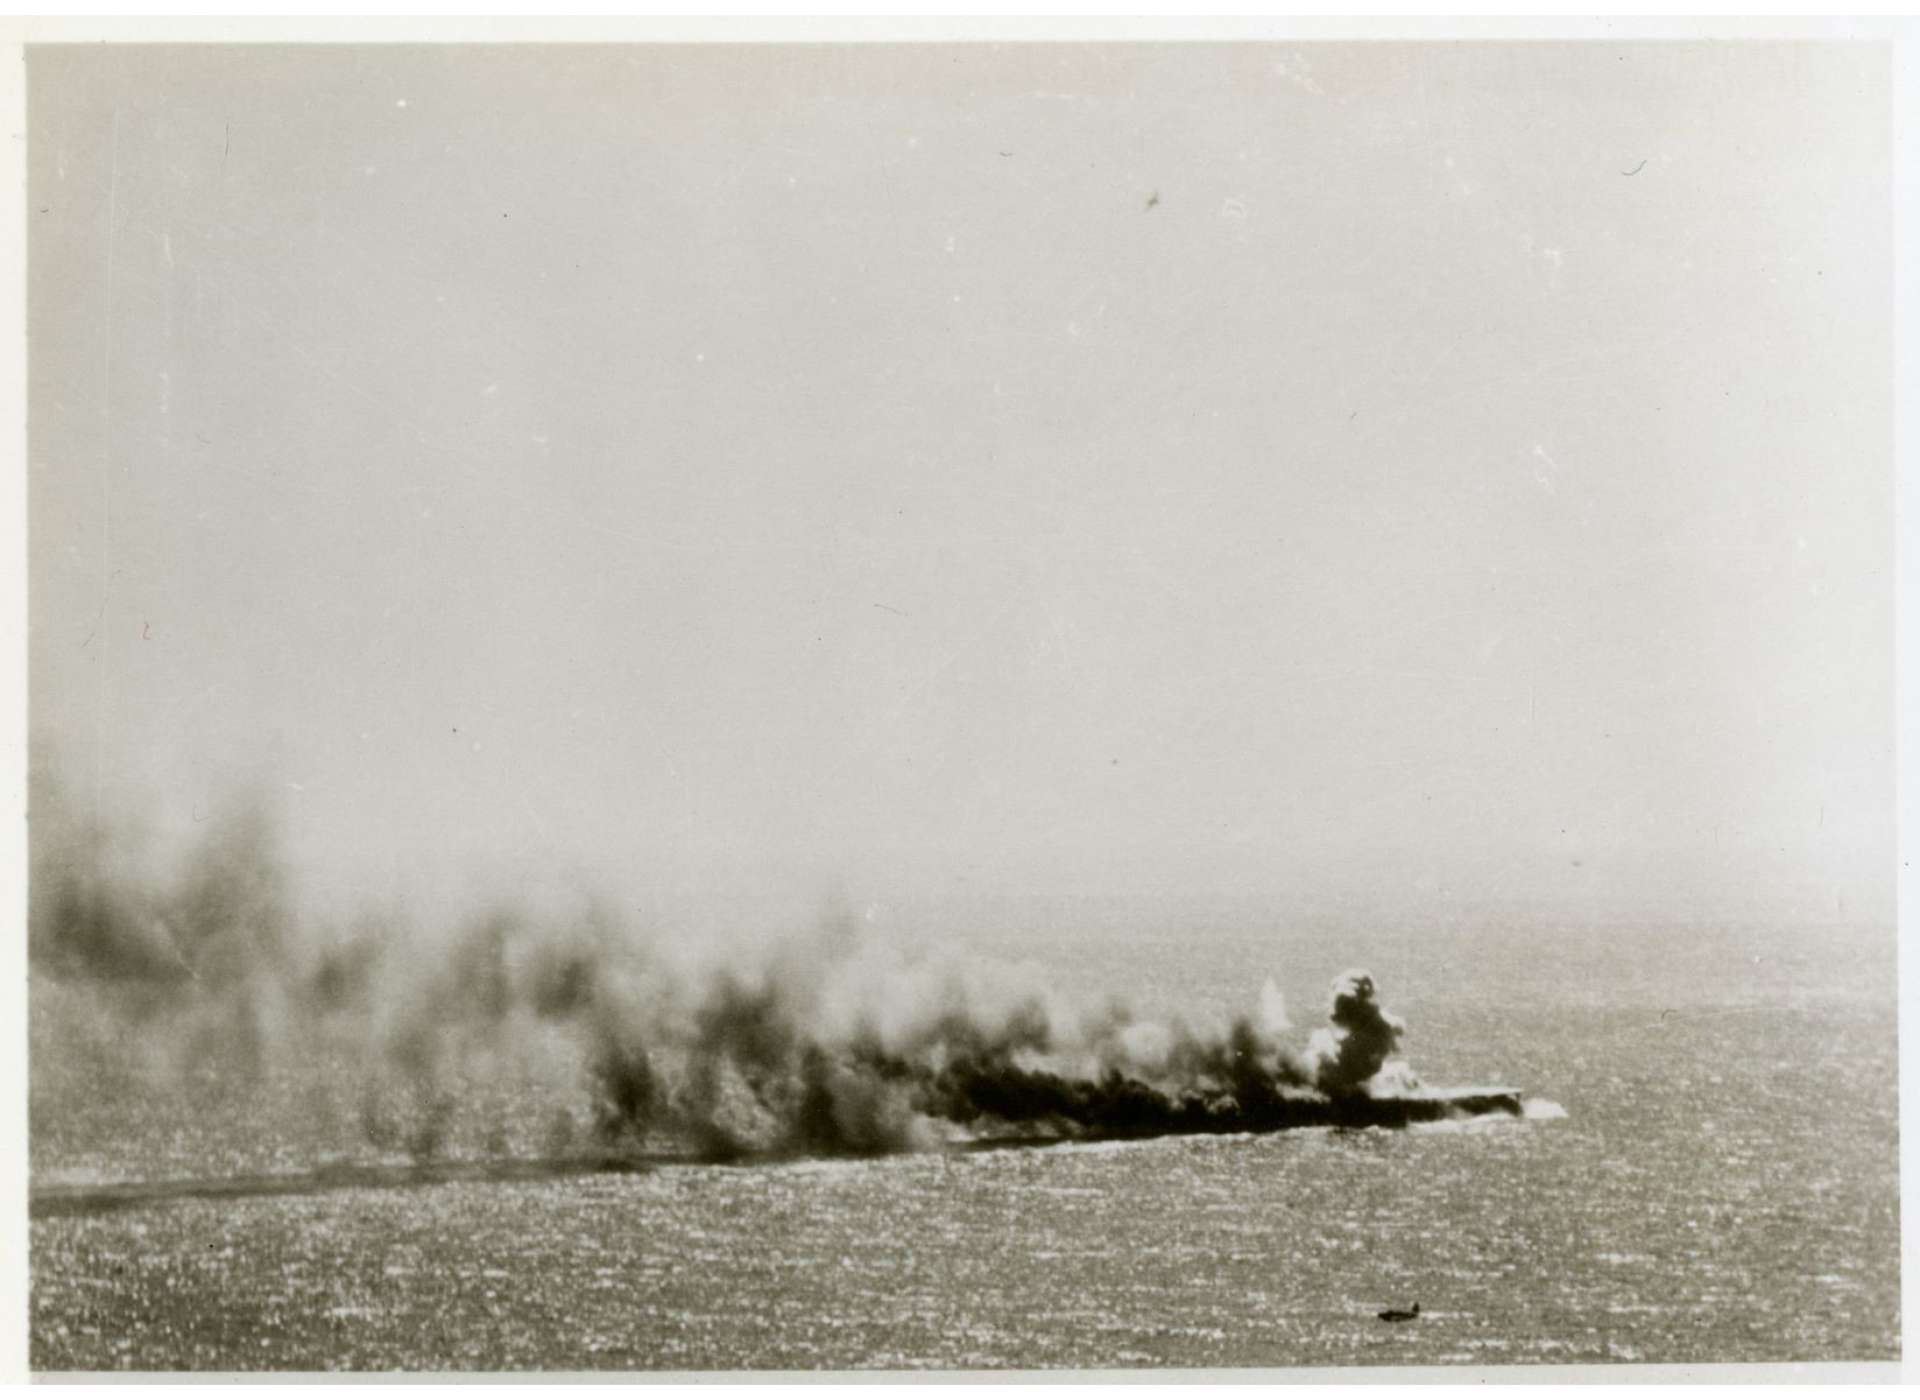 Smoke billowing from Japanese Carrier SHŌHŌ, Photo courtesy of The National WWII Museum, Gift in memory of Sgt. Lyle E. Eberspecher, 2013.495.381